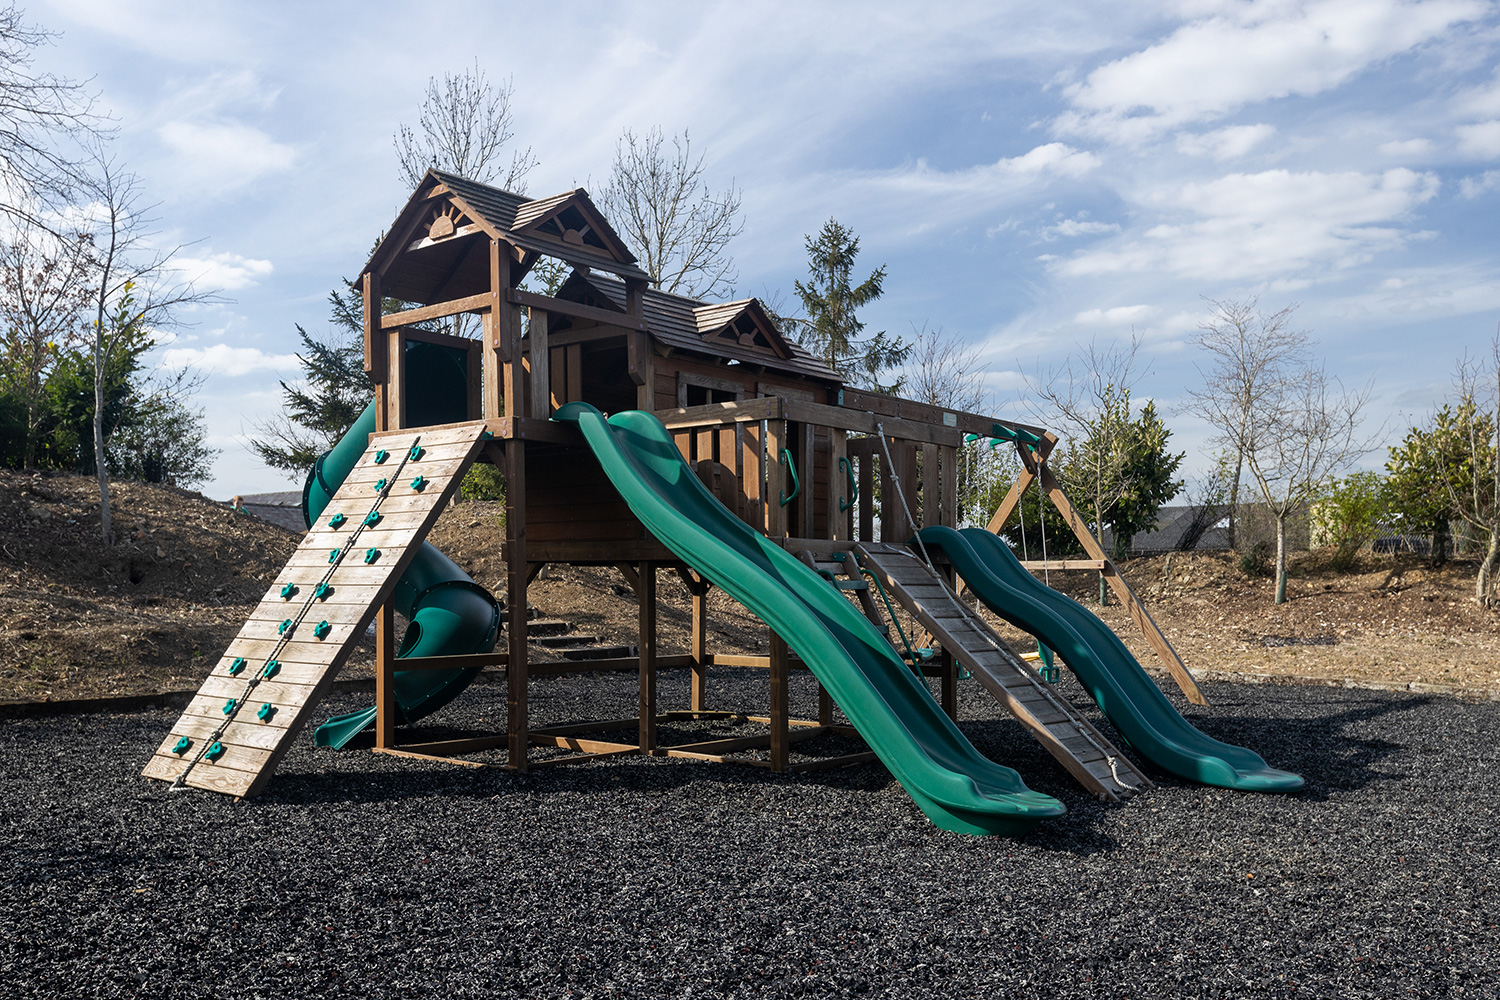 Climbing play area with slides and netting